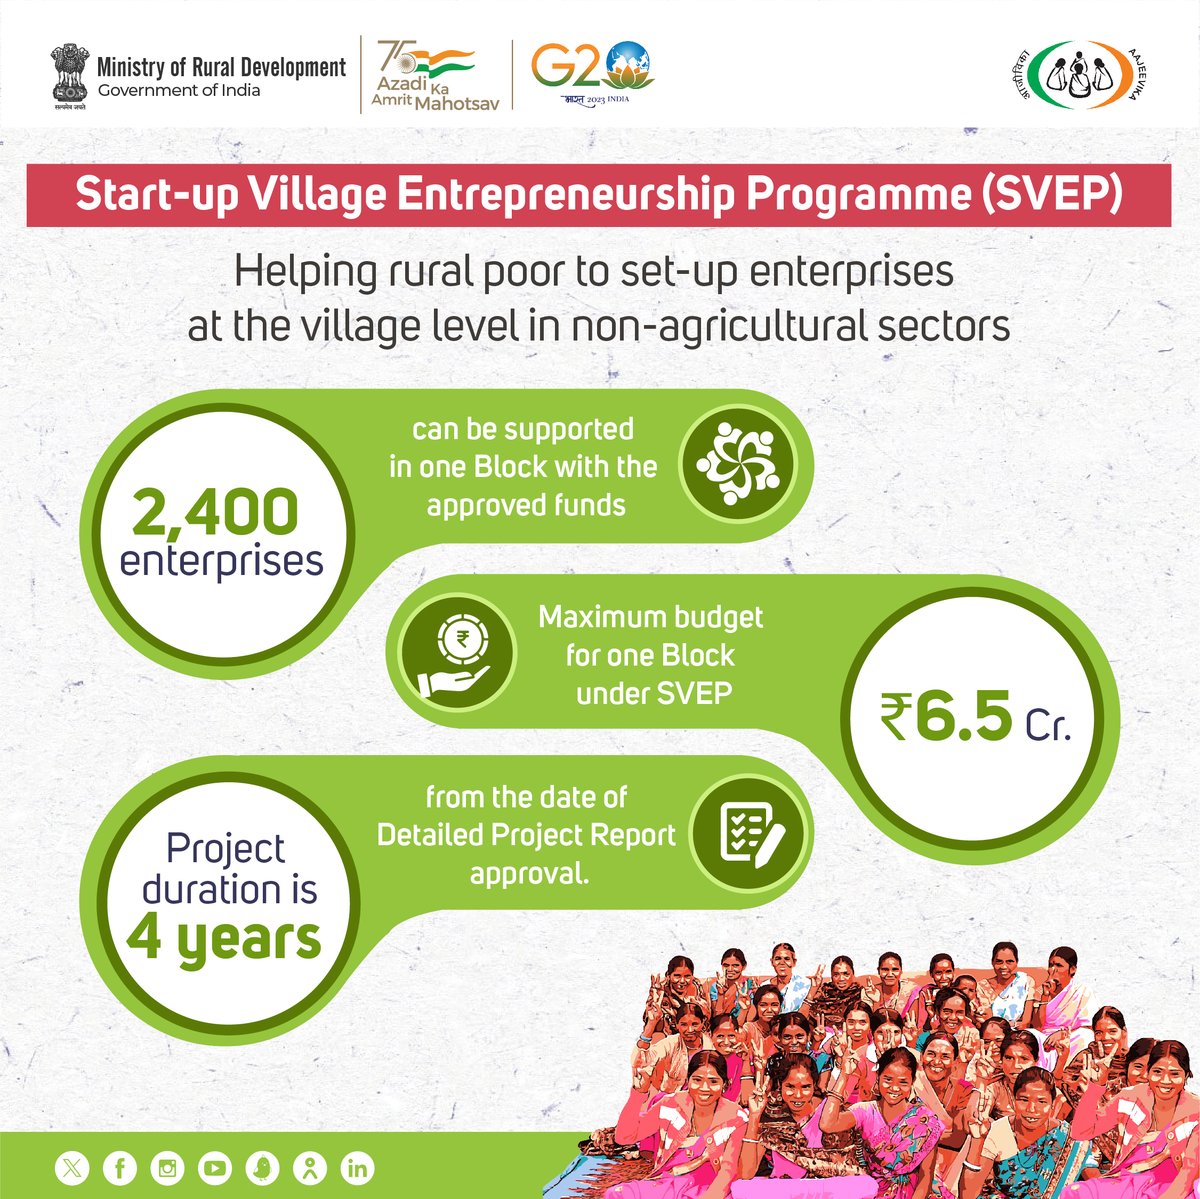 Start-up Village Entrepreneurship Programme (#SVEP) is a sub-scheme #DAYNRLM with Block as an operational unit of the project. It supports existing enterprises as well as setting up of new enterprises. #MoRD #RuralEmployment